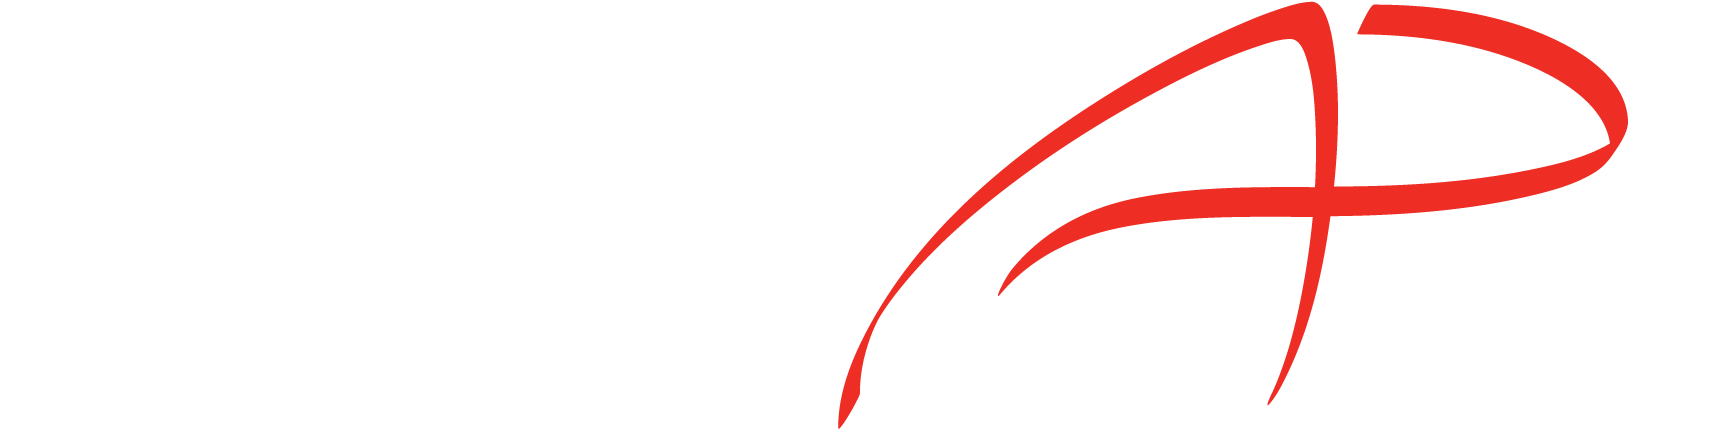 Air Products And Controls (1760x511)